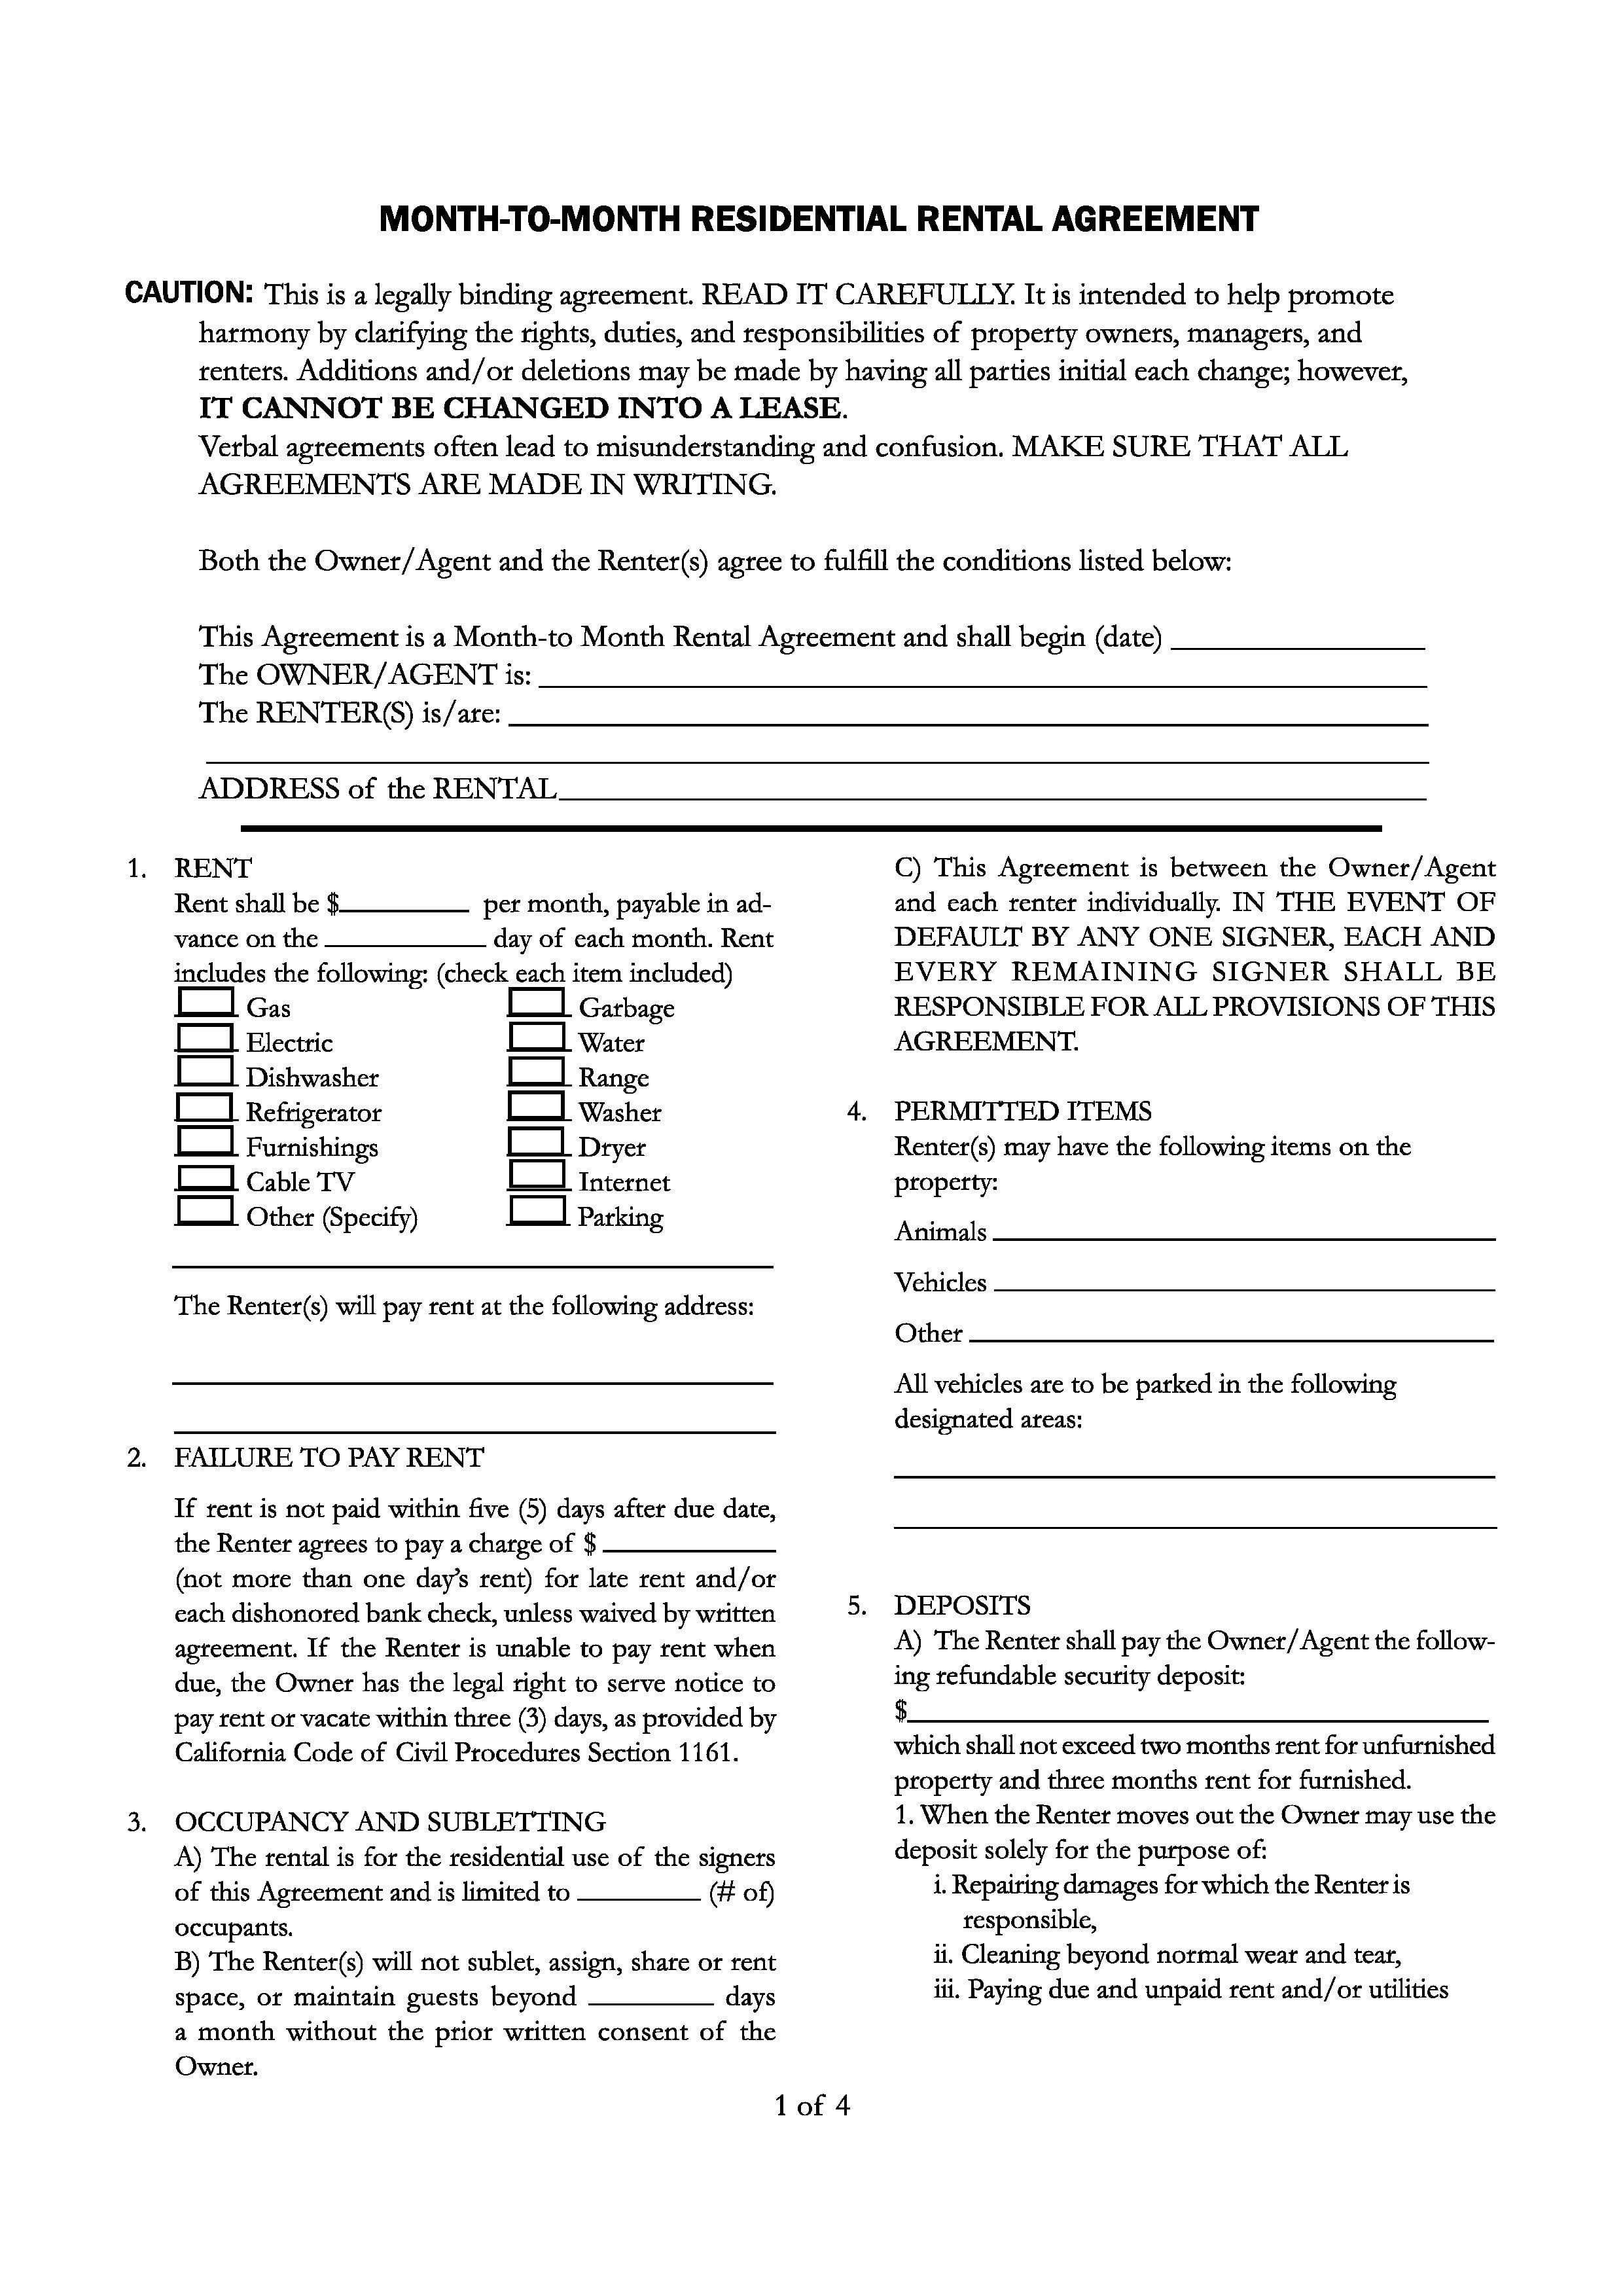 Termination of lease agreement by landlord